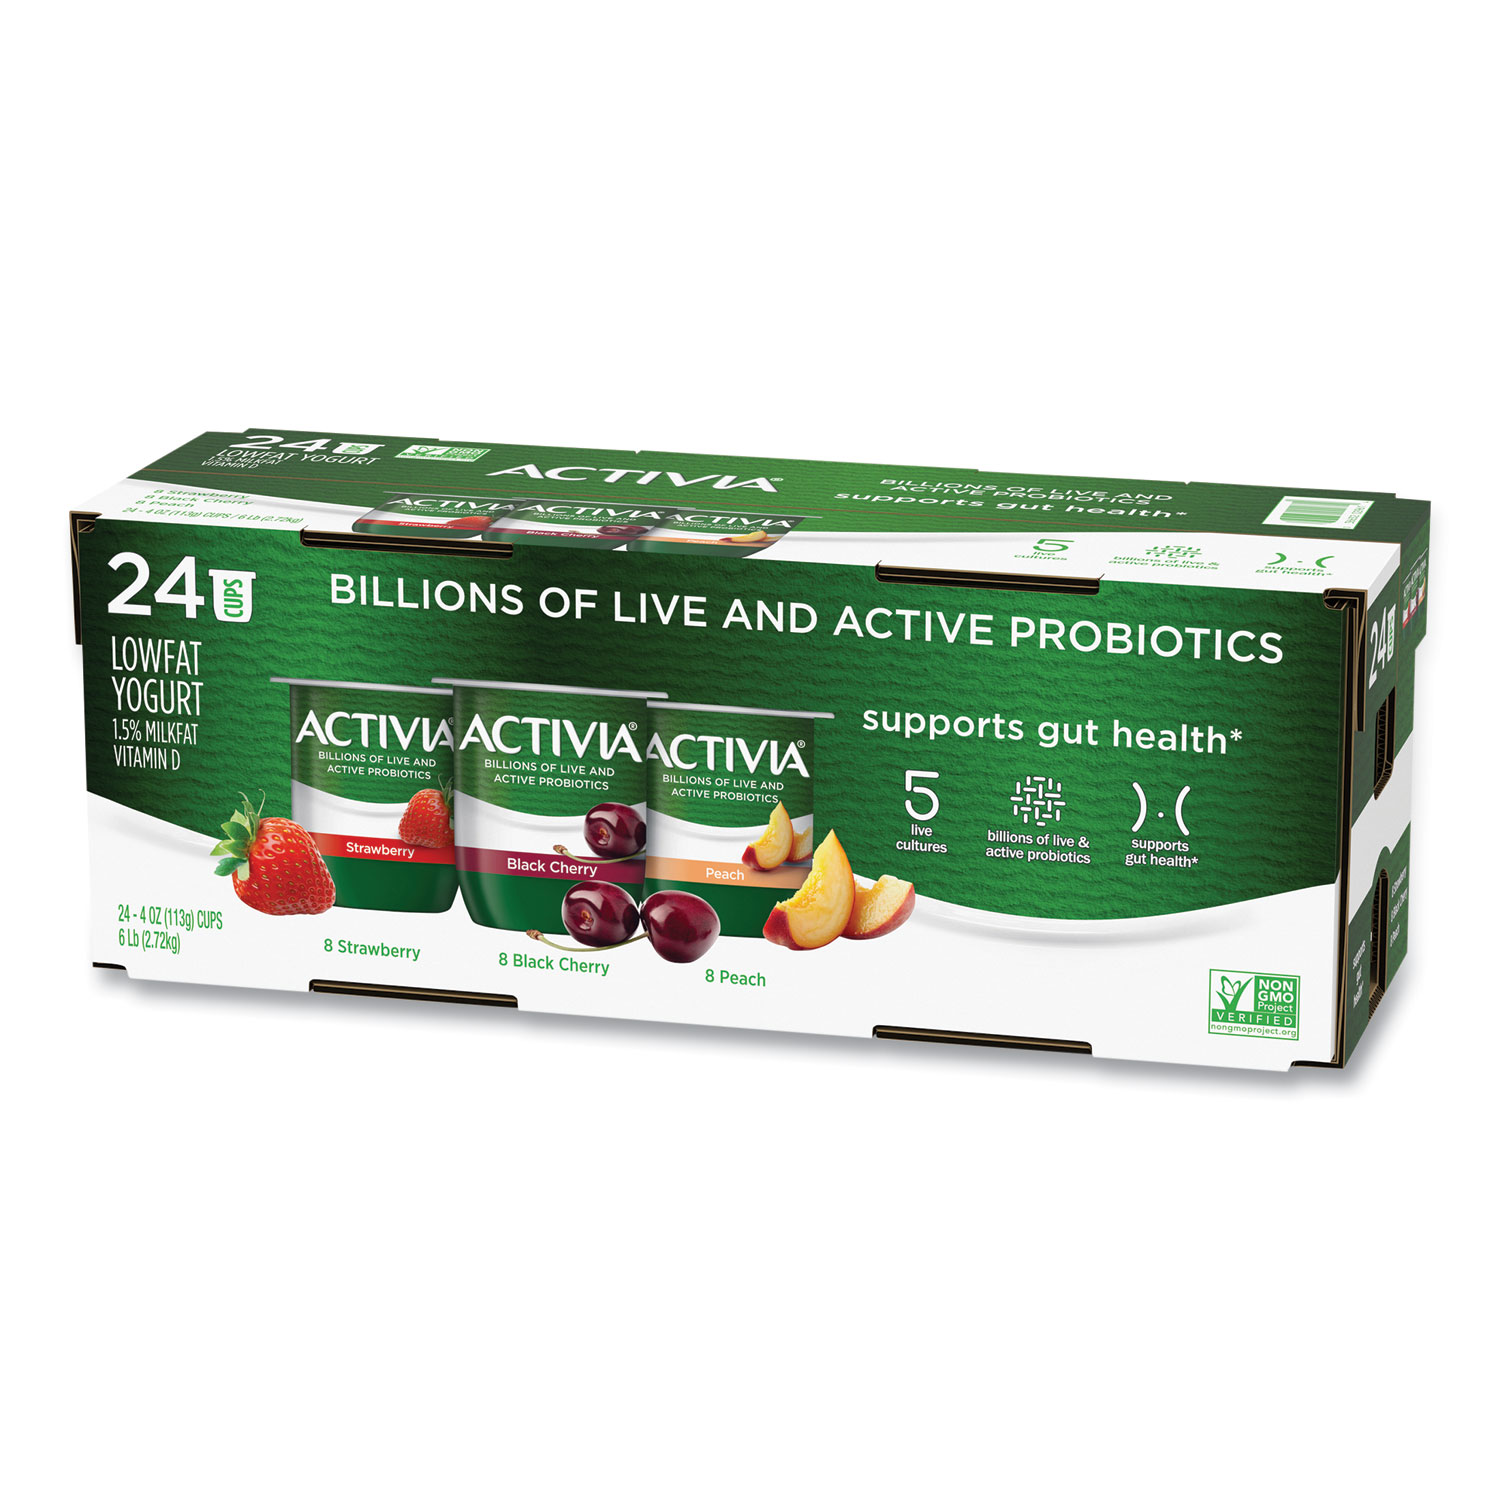 Activia® Probiotic Lowfat Yogurt, 4 oz Cups, Black Cherry/Peach/Strawberry, 24/Pack, Free Delivery in 1-4 Business Days